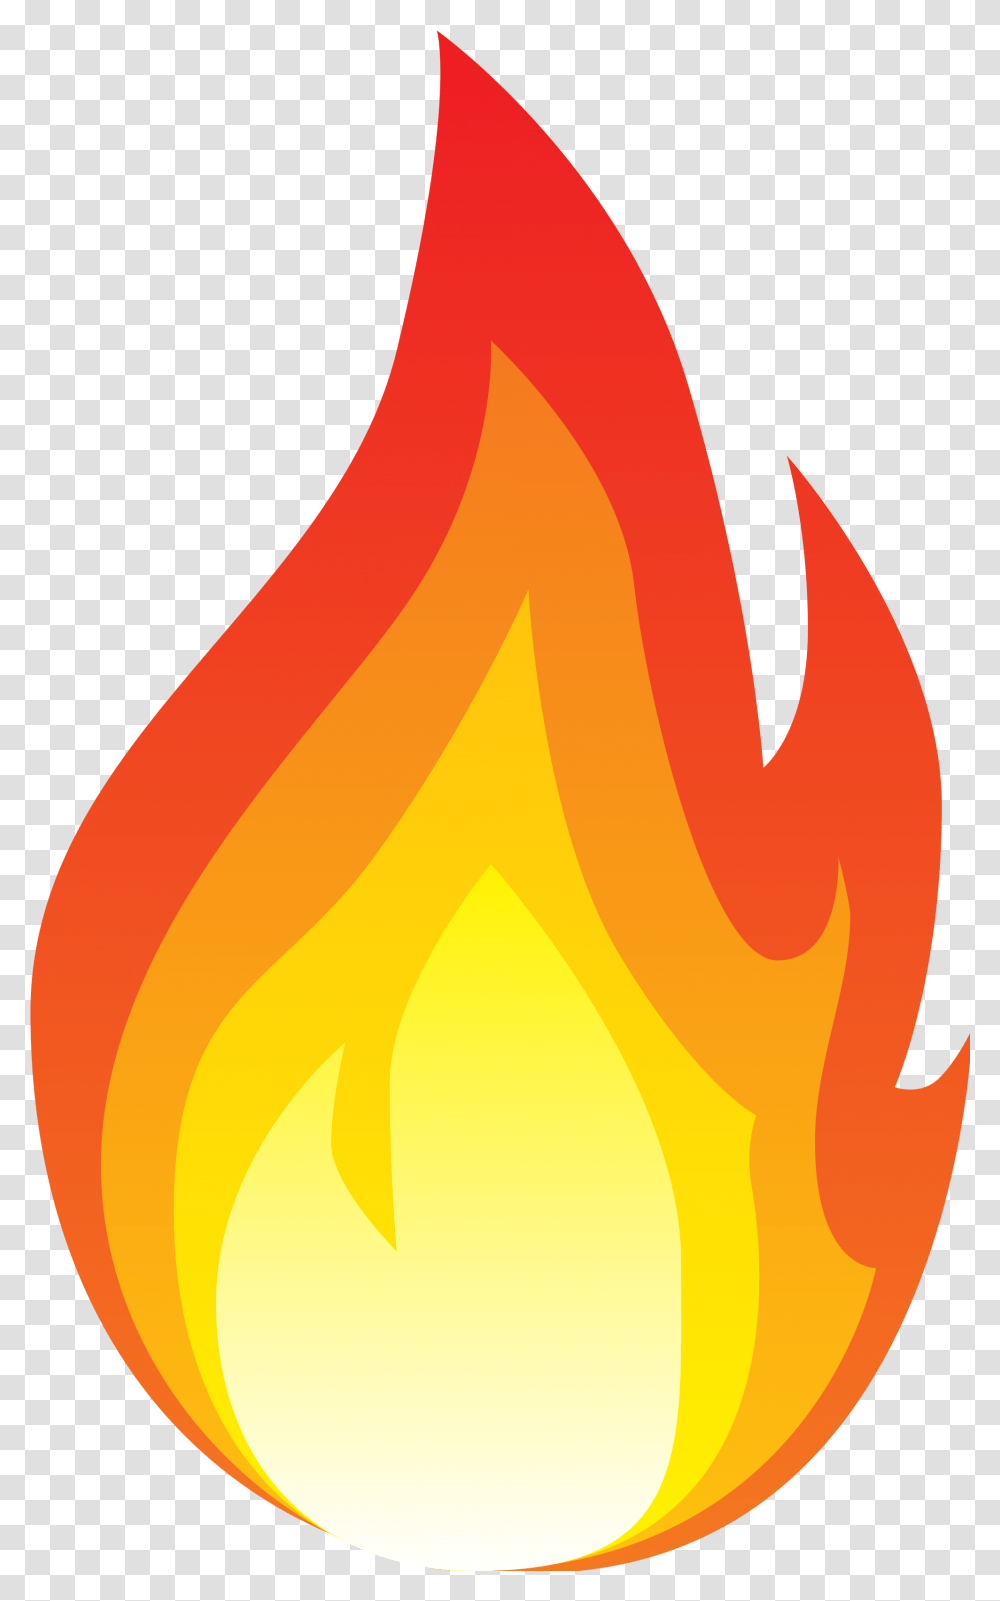 Download Hd Fire Svg Icon Free Fire Clipart, Flame, Bonfire Transparent Png